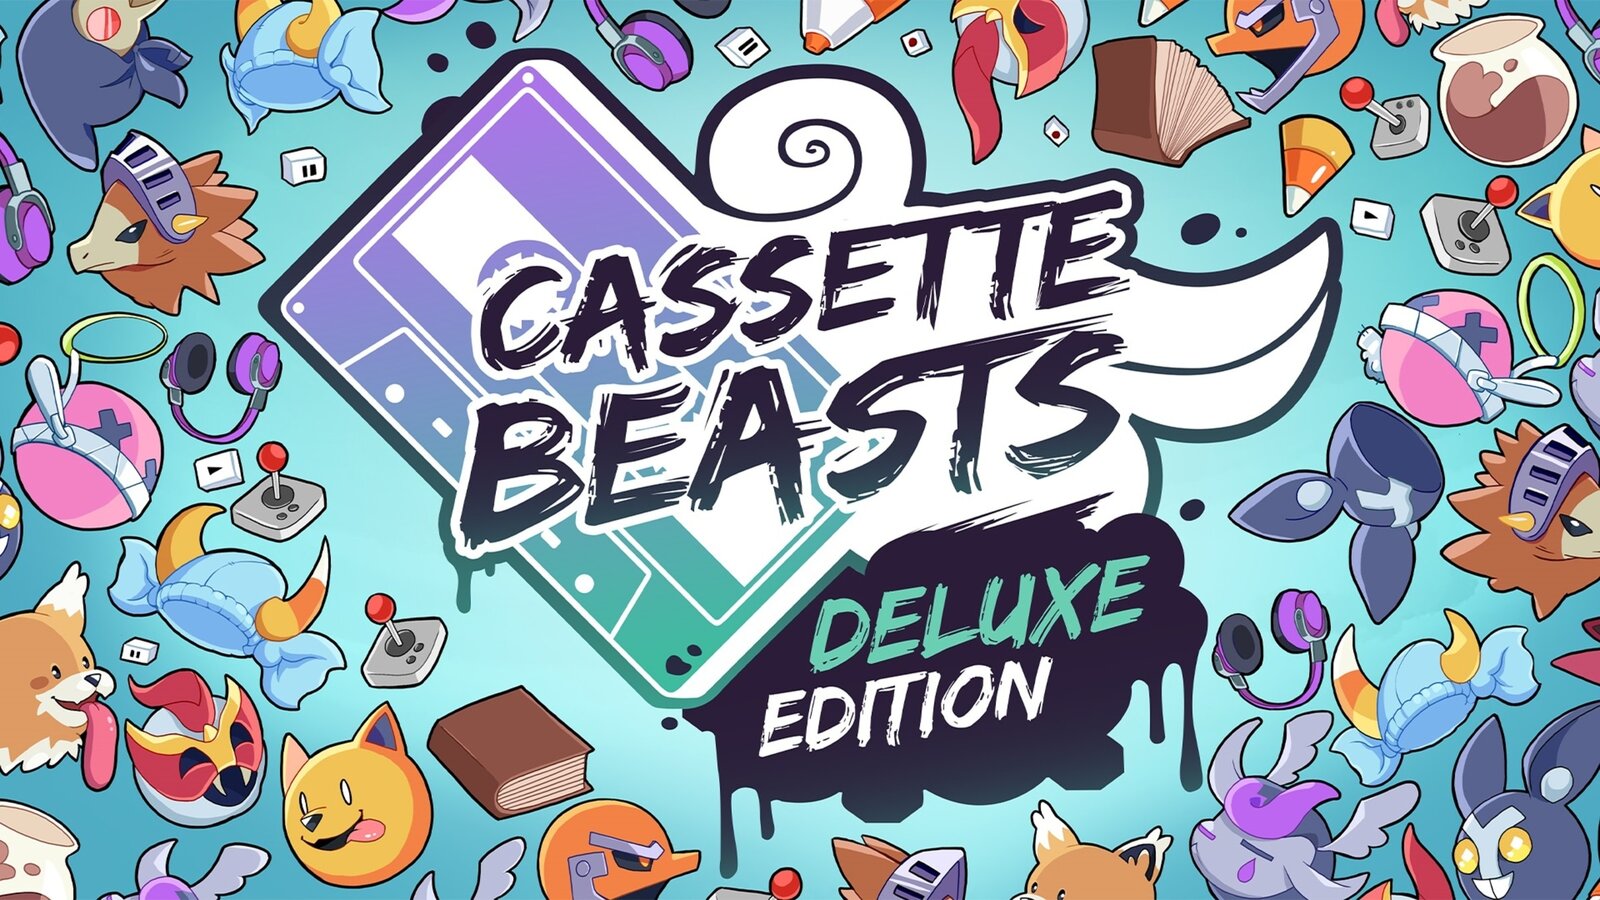 Cassette Beasts - Deluxe Edition